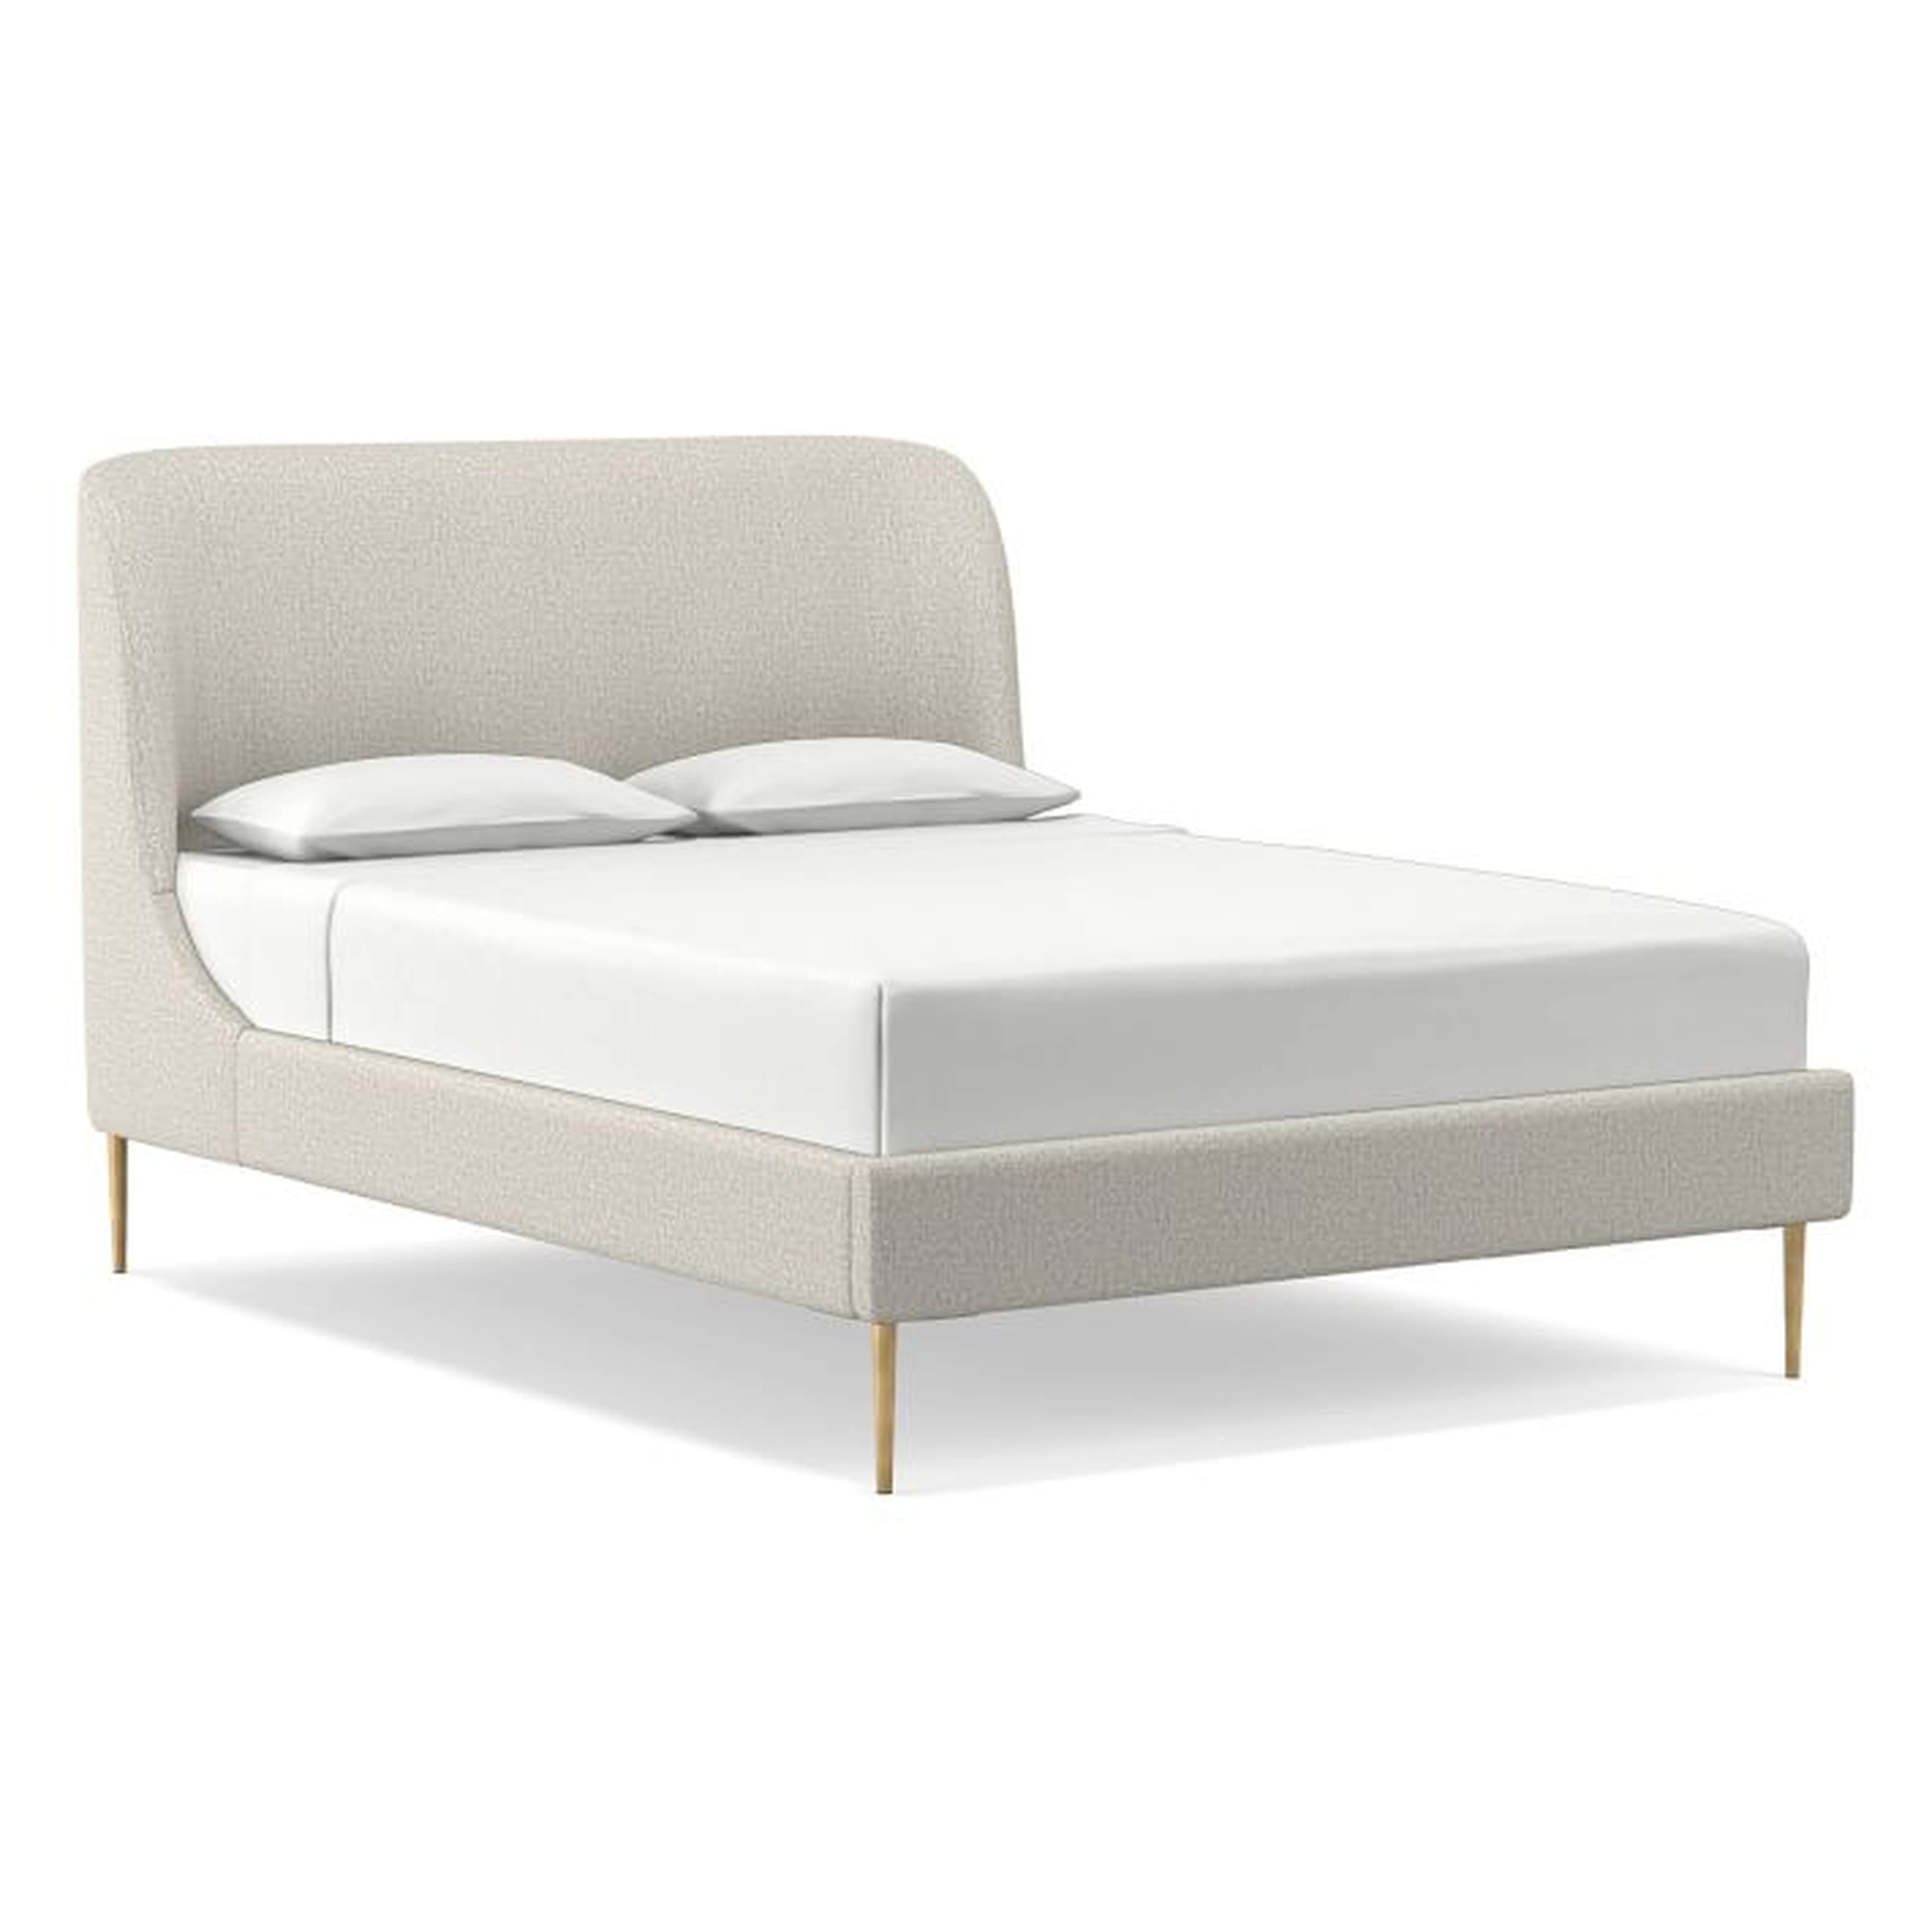 Lana Upholstered Bed, Queen, Twill, Stone - West Elm